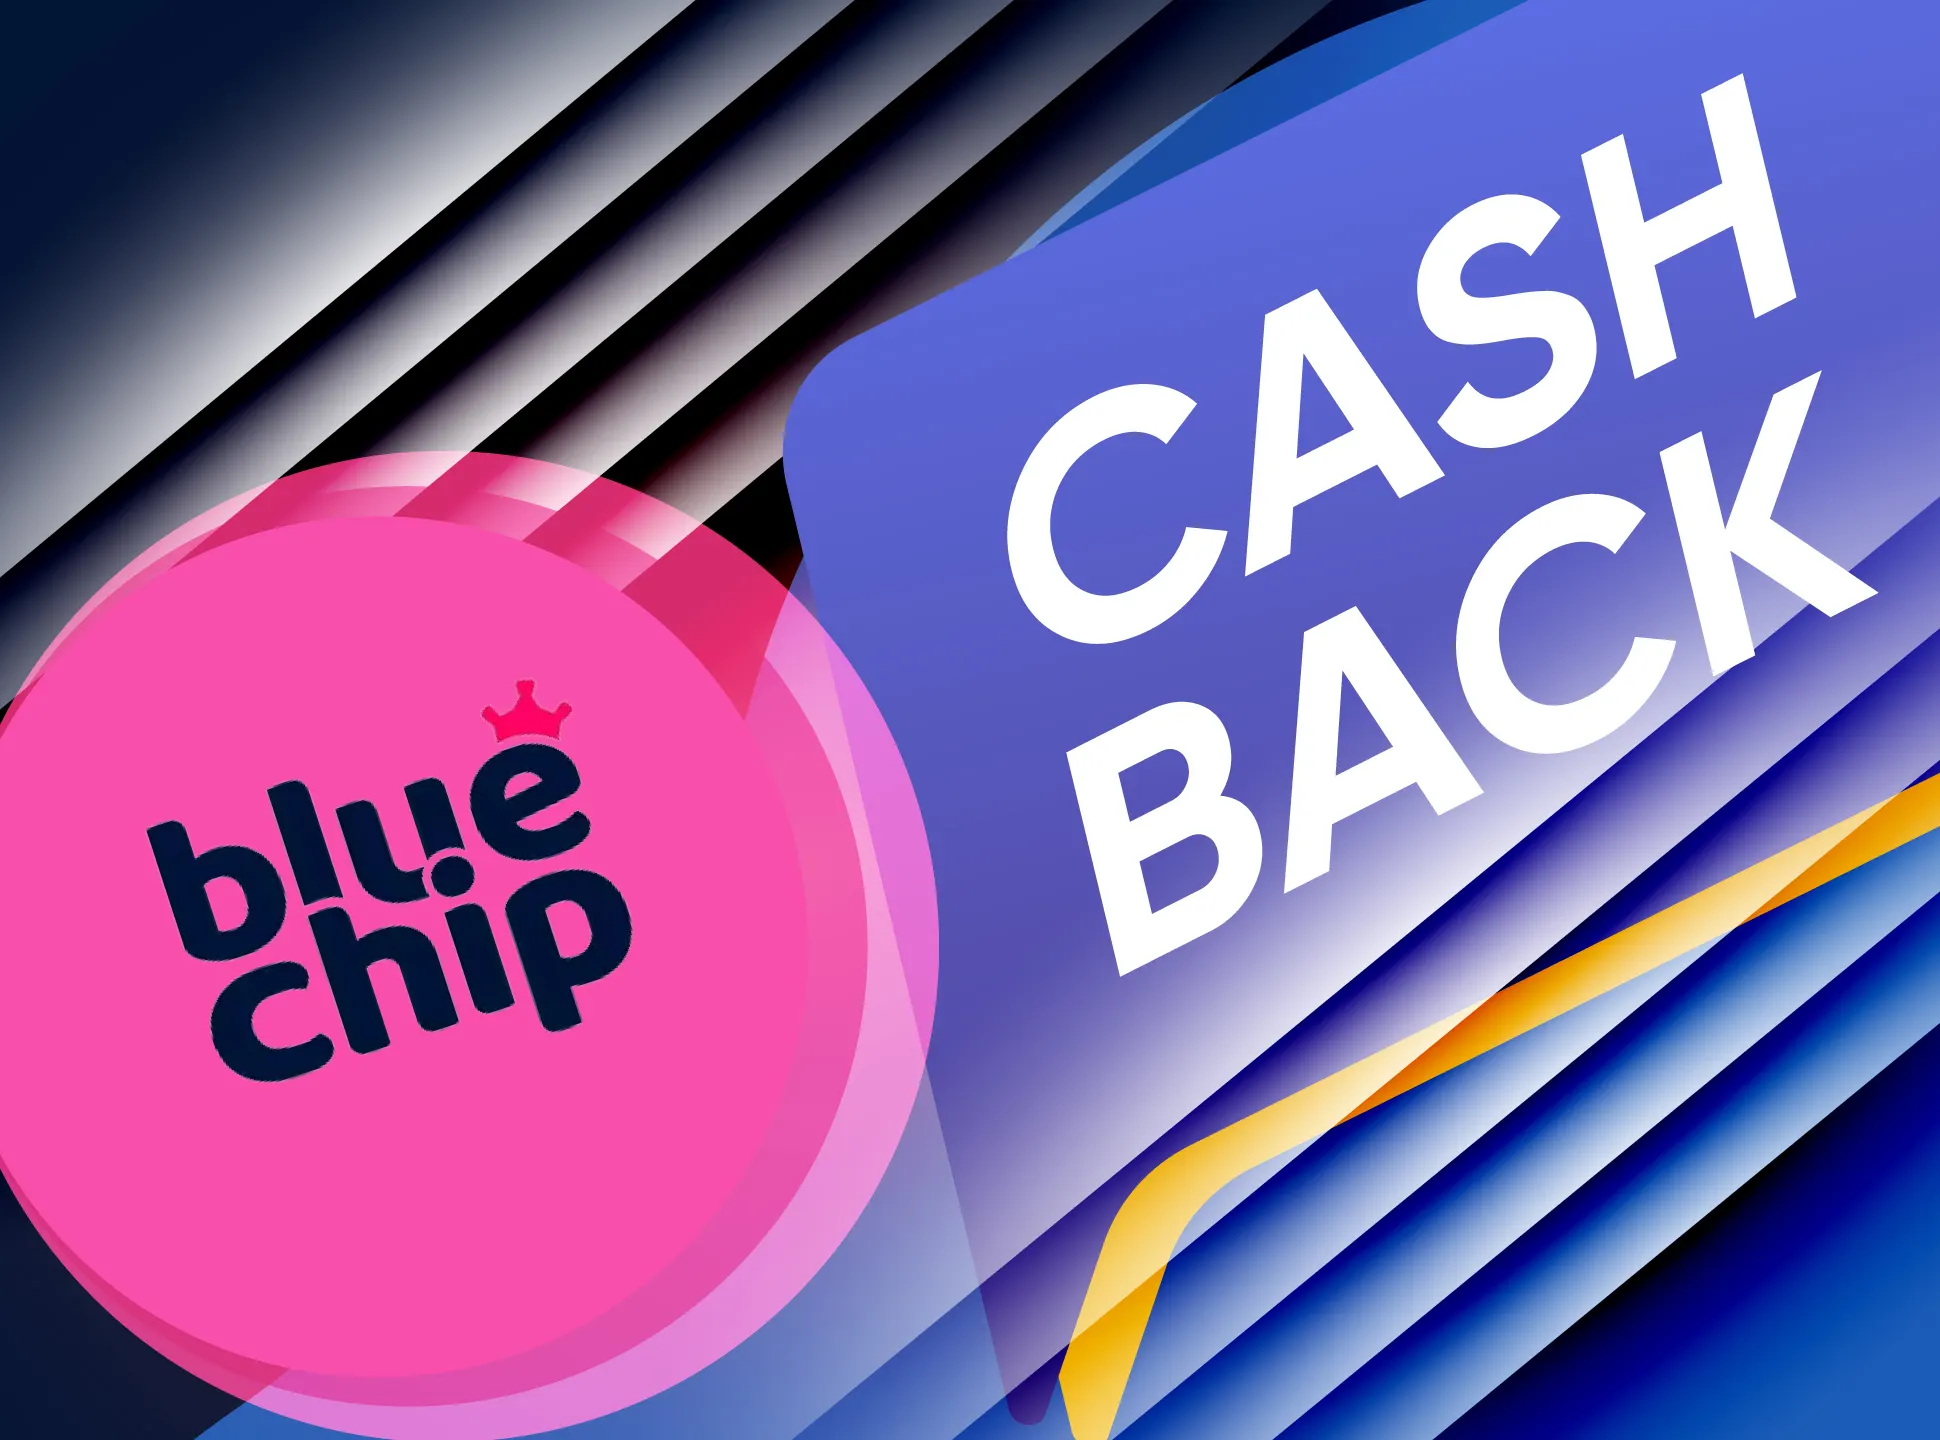 You can receive a weekly cashback at Bluechip.